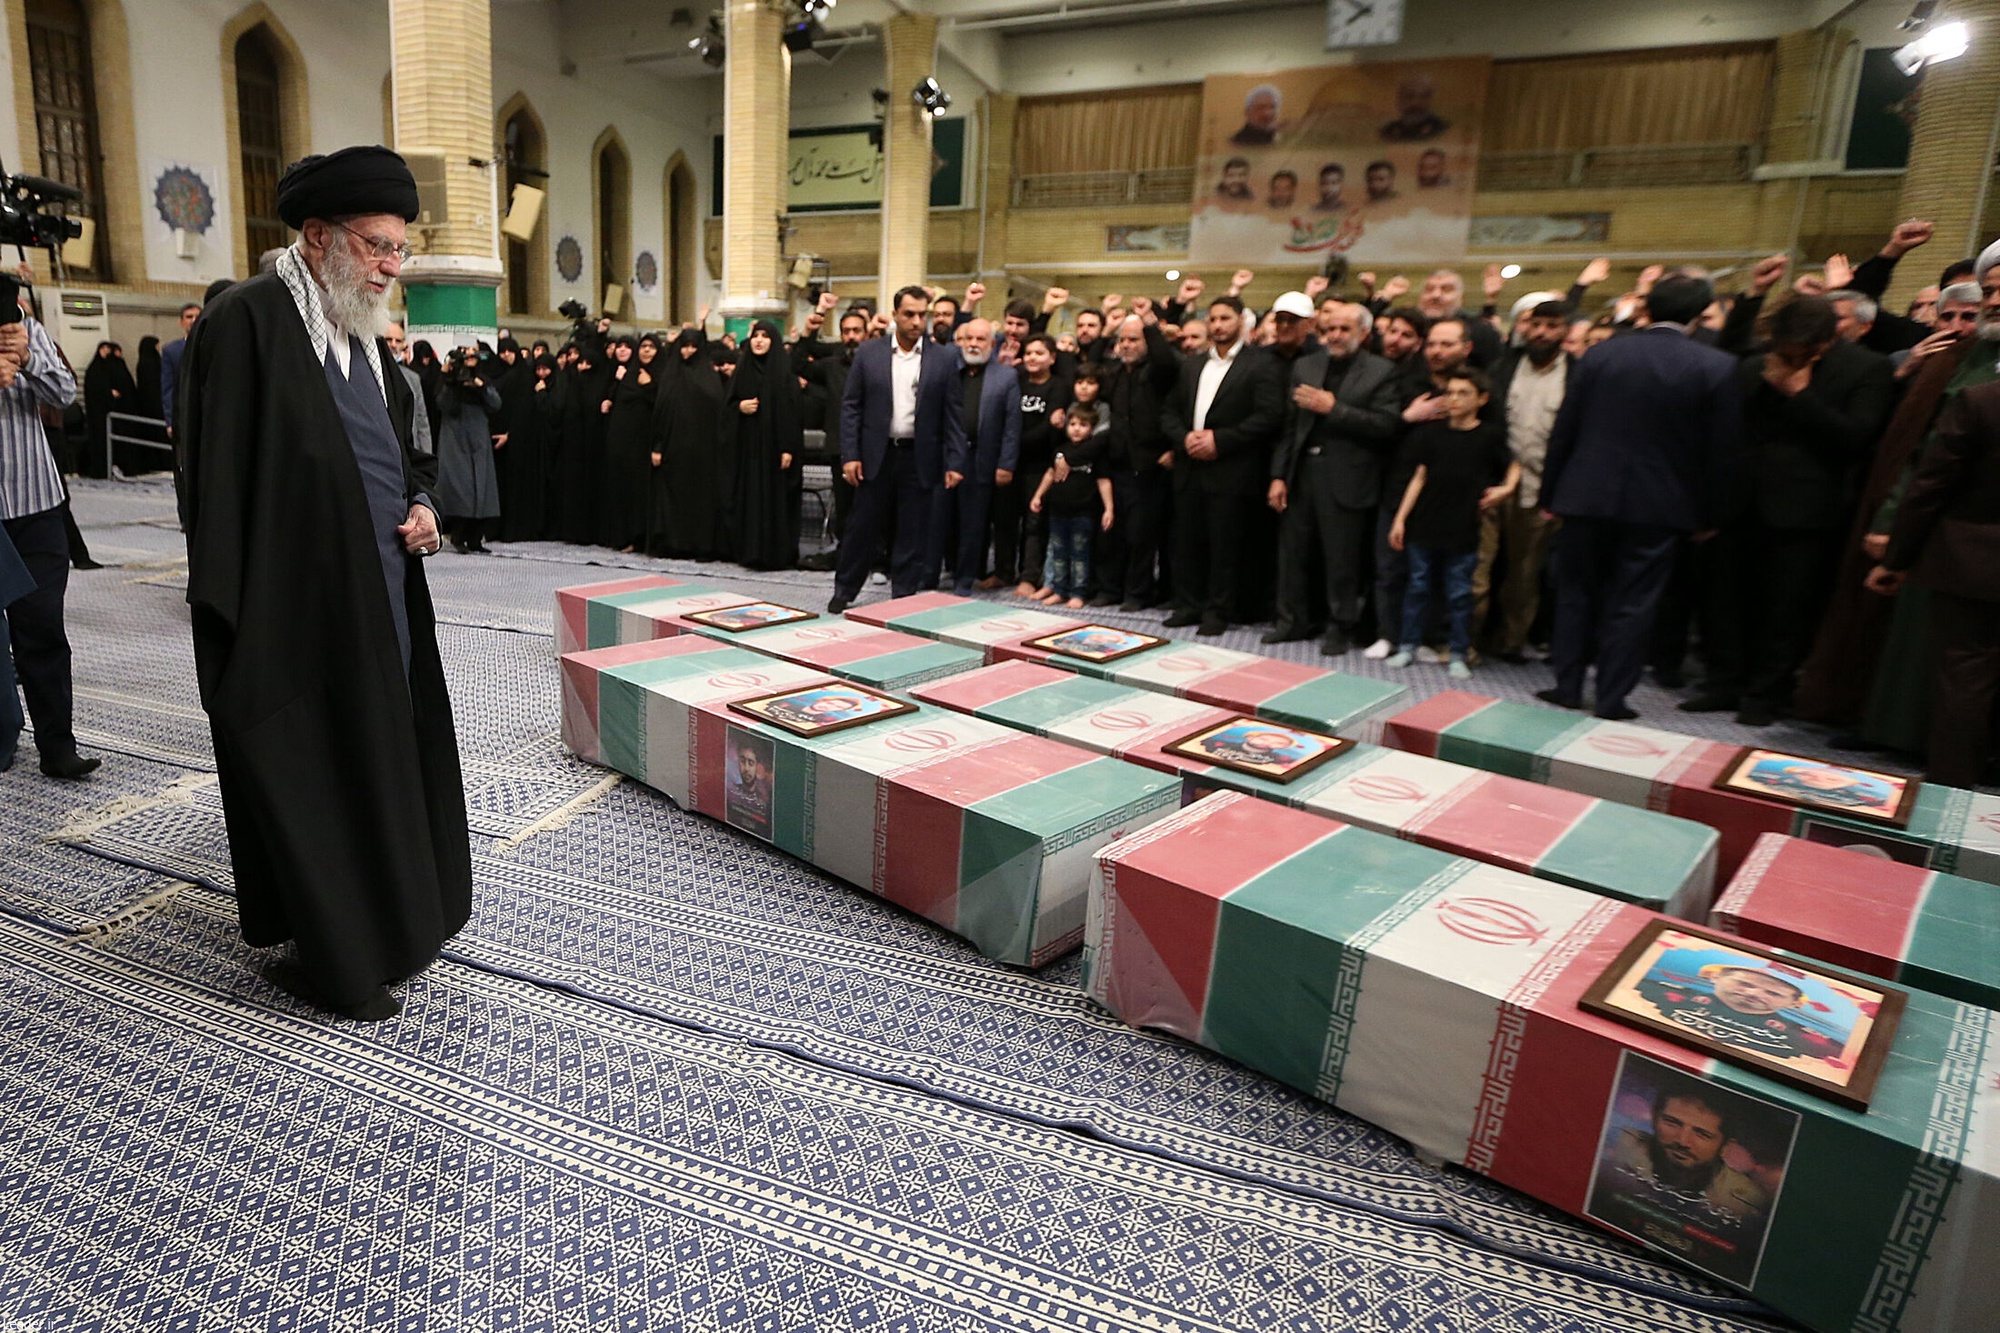 epa11259284 A handout photo made available by the Iranian supreme leader office shows Iranian Supreme Leader Ayatollah Ali Khamenei (L) praying over the coffins of members of the Iranian revolutionary guards corps (IRGC) who were killed in Syria, ahead of their funeral in Tehran, Iran, 04 April 2024. According to Iranian state media quoting the Islamic Revolutionary Guard Corps, at least seven IRGC military advisors, including two generals, were killed in an airstrike on the Iranian consulate building in Syria&#039;s capital Damascus on 01 April. Iran has blamed Israel for the attack and vowed to respond. Iranians will hold a funeral ceremony for them on 05 April 2024.  EPA/IRANIAN SUPREME LEADER OFFICE / HANDOUT  HANDOUT EDITORIAL USE ONLY/NO SALES HANDOUT EDITORIAL USE ONLY/NO SALES